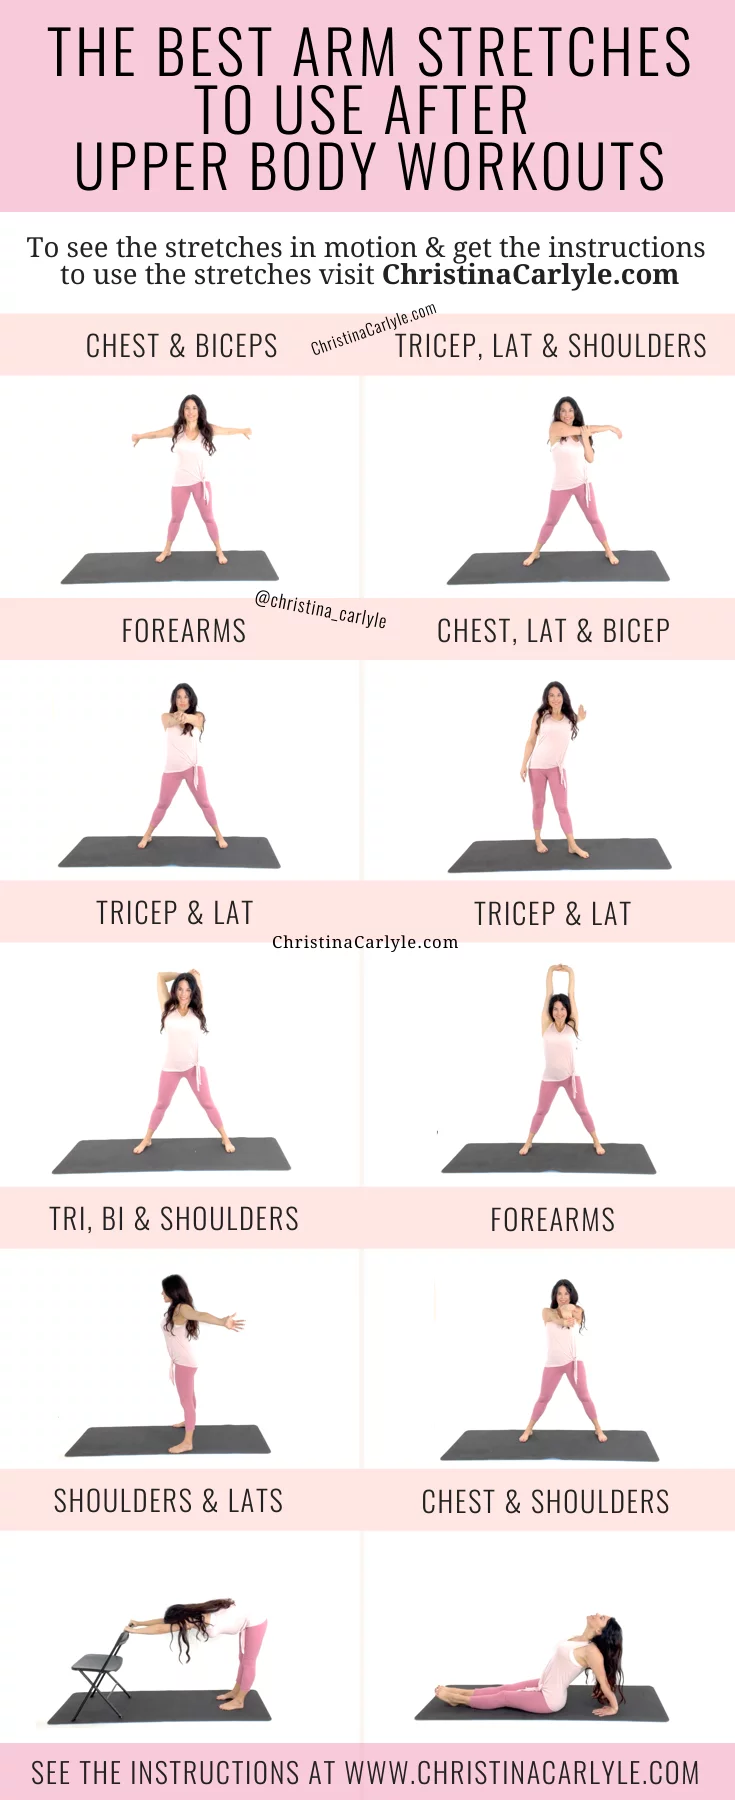 https://www.christinacarlyle.com/wp-content/uploads/2022/01/the-best-arm-stretches-Christina-Carlyle.png